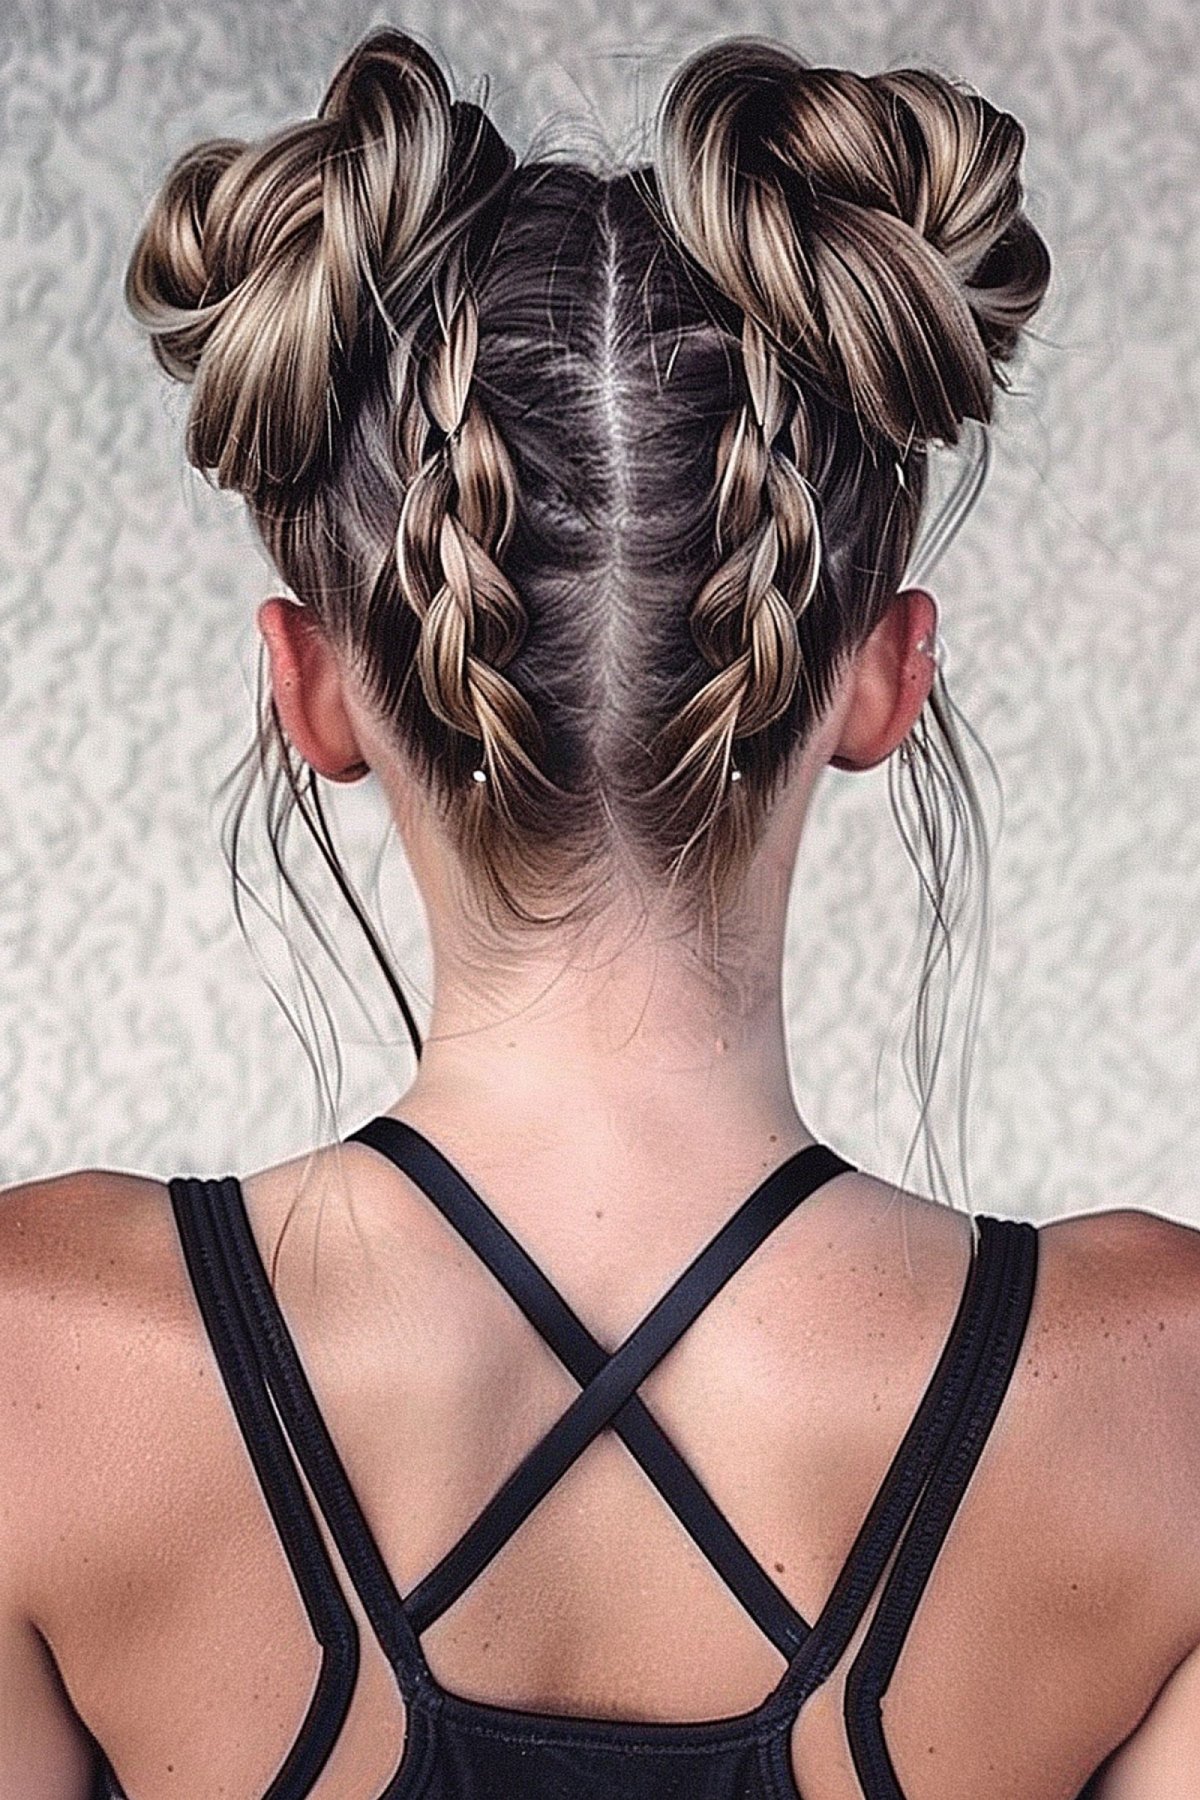 Braided space buns hairstyle with intricate braiding detail for swimming